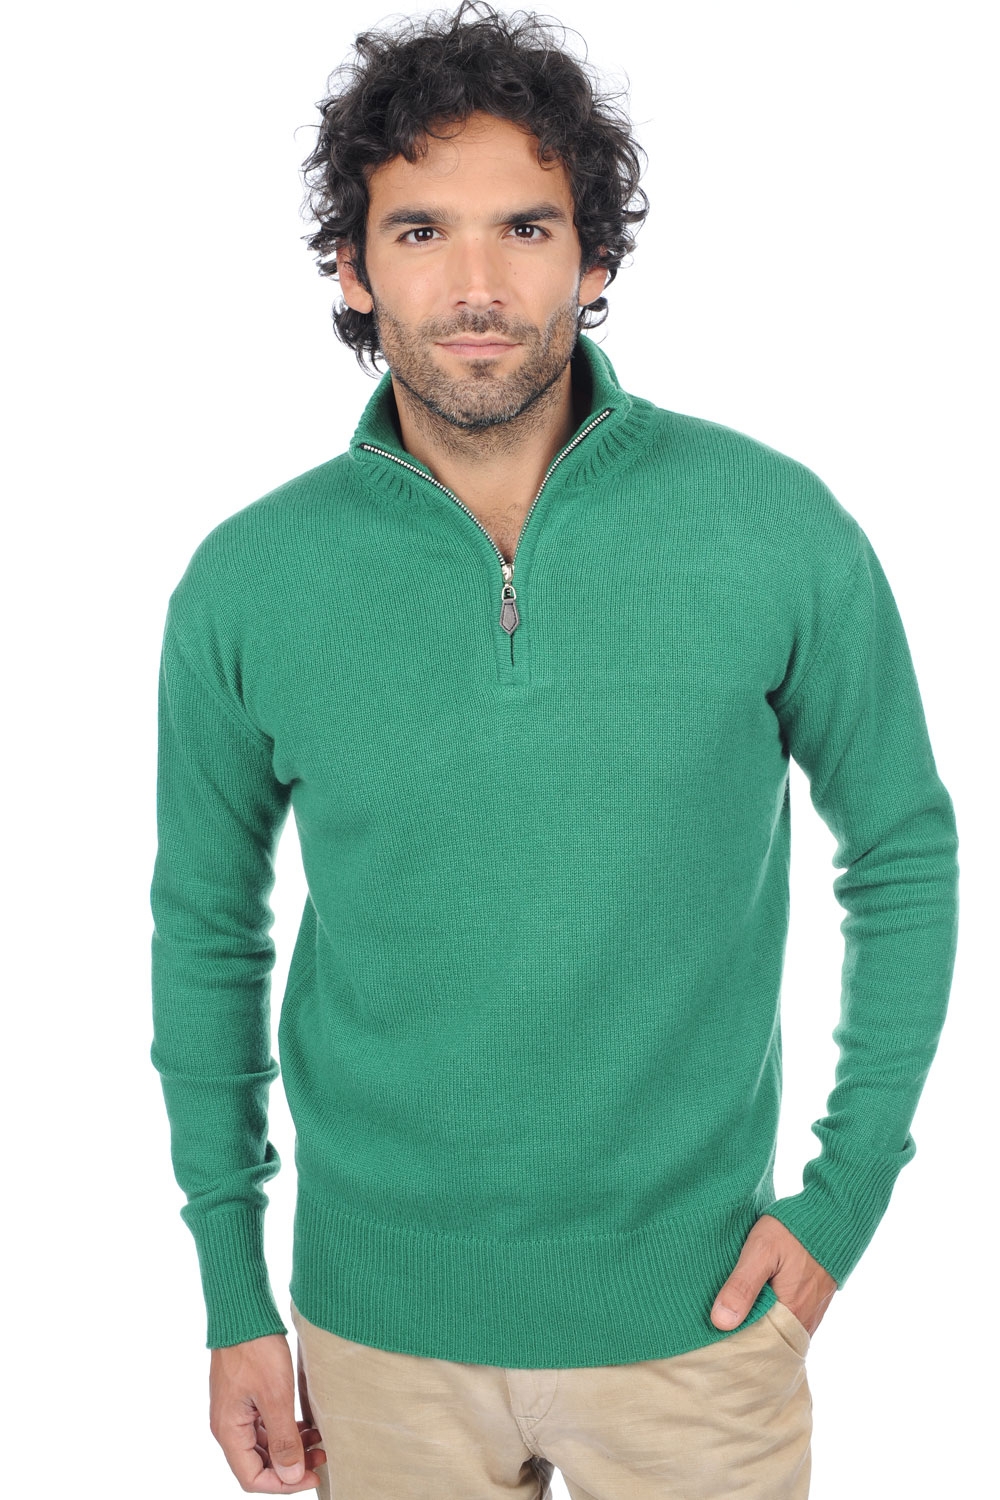 Cashmere men polo style sweaters donovan evergreen xs